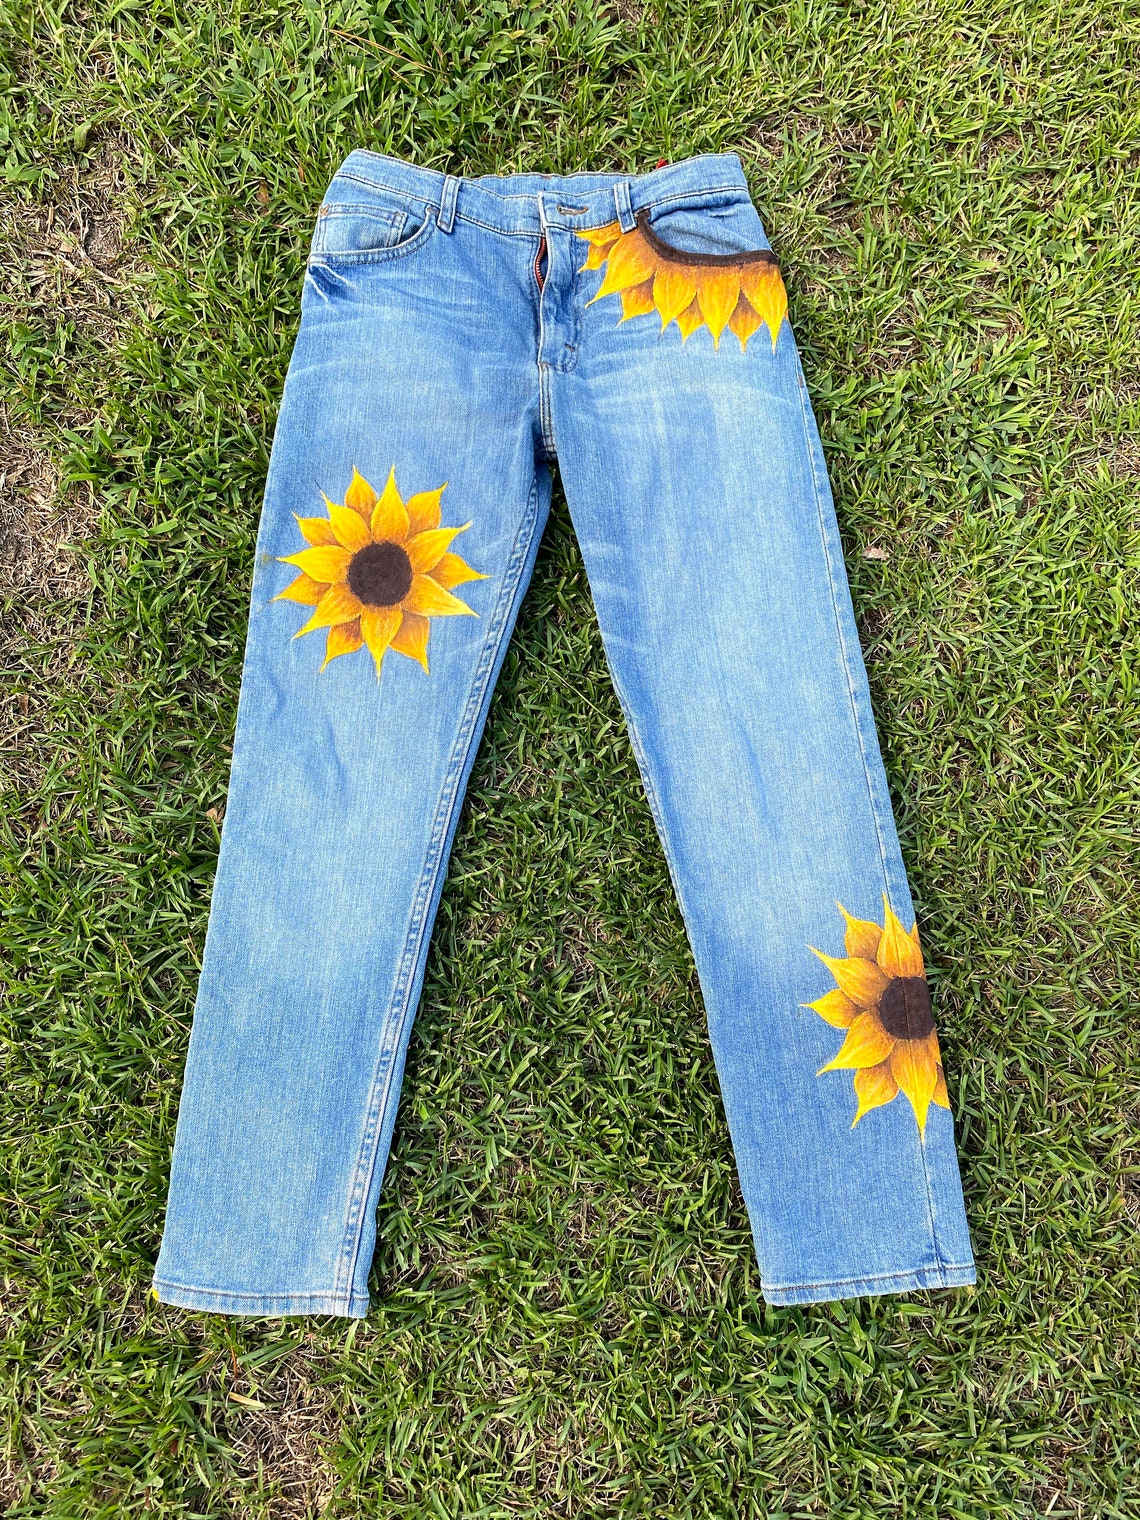 Hand Painted Sunflower Jeans | Etsy